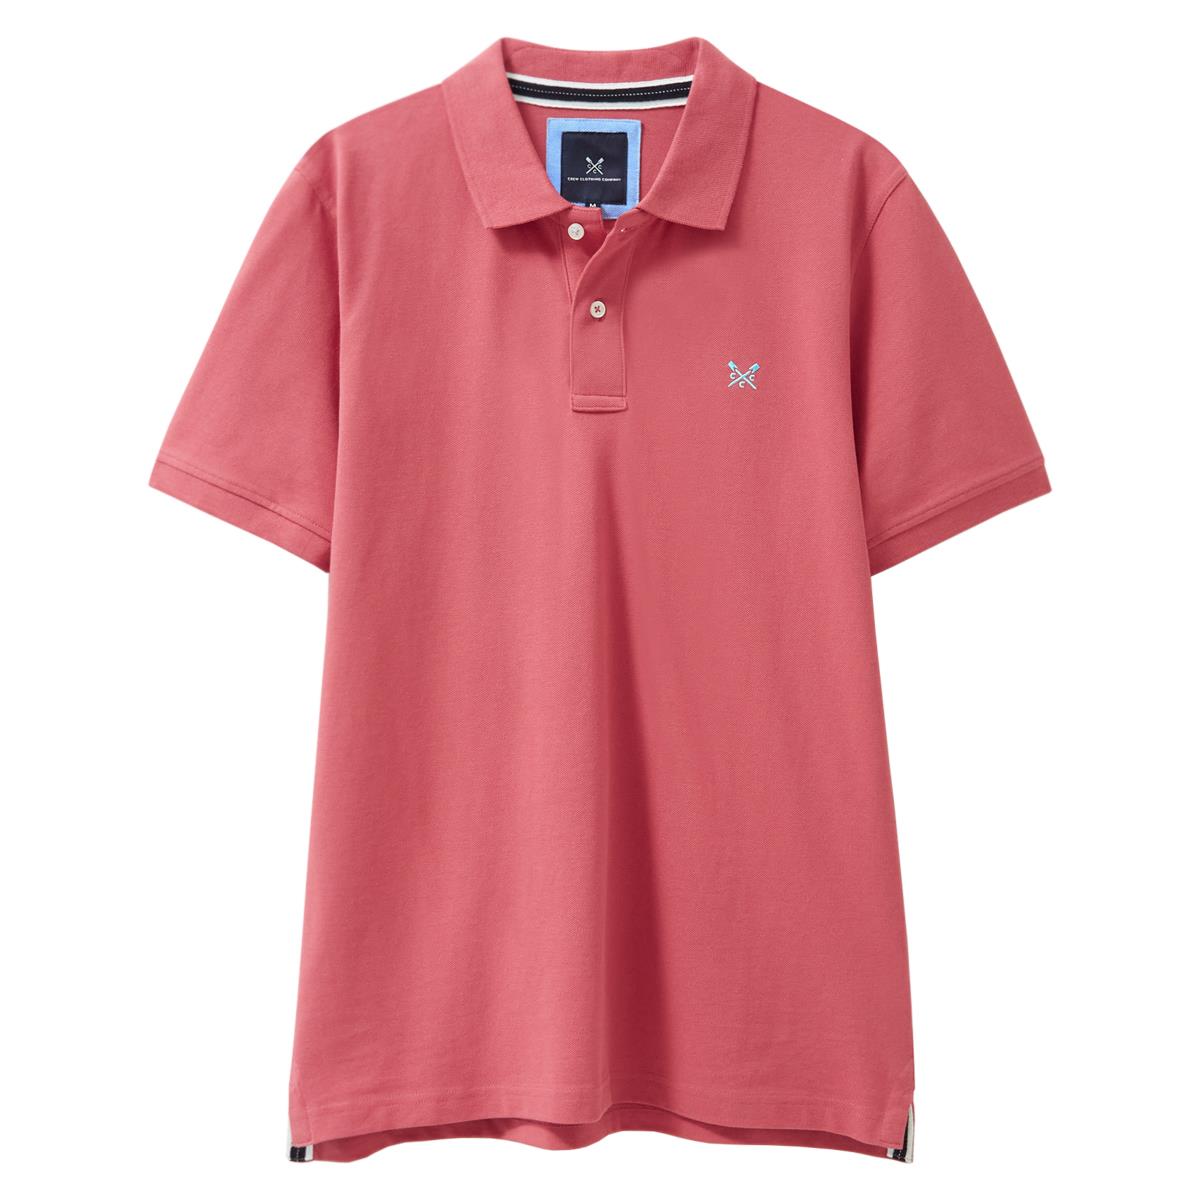 What is the reference number for Crew Clothing's crew polo shirts?